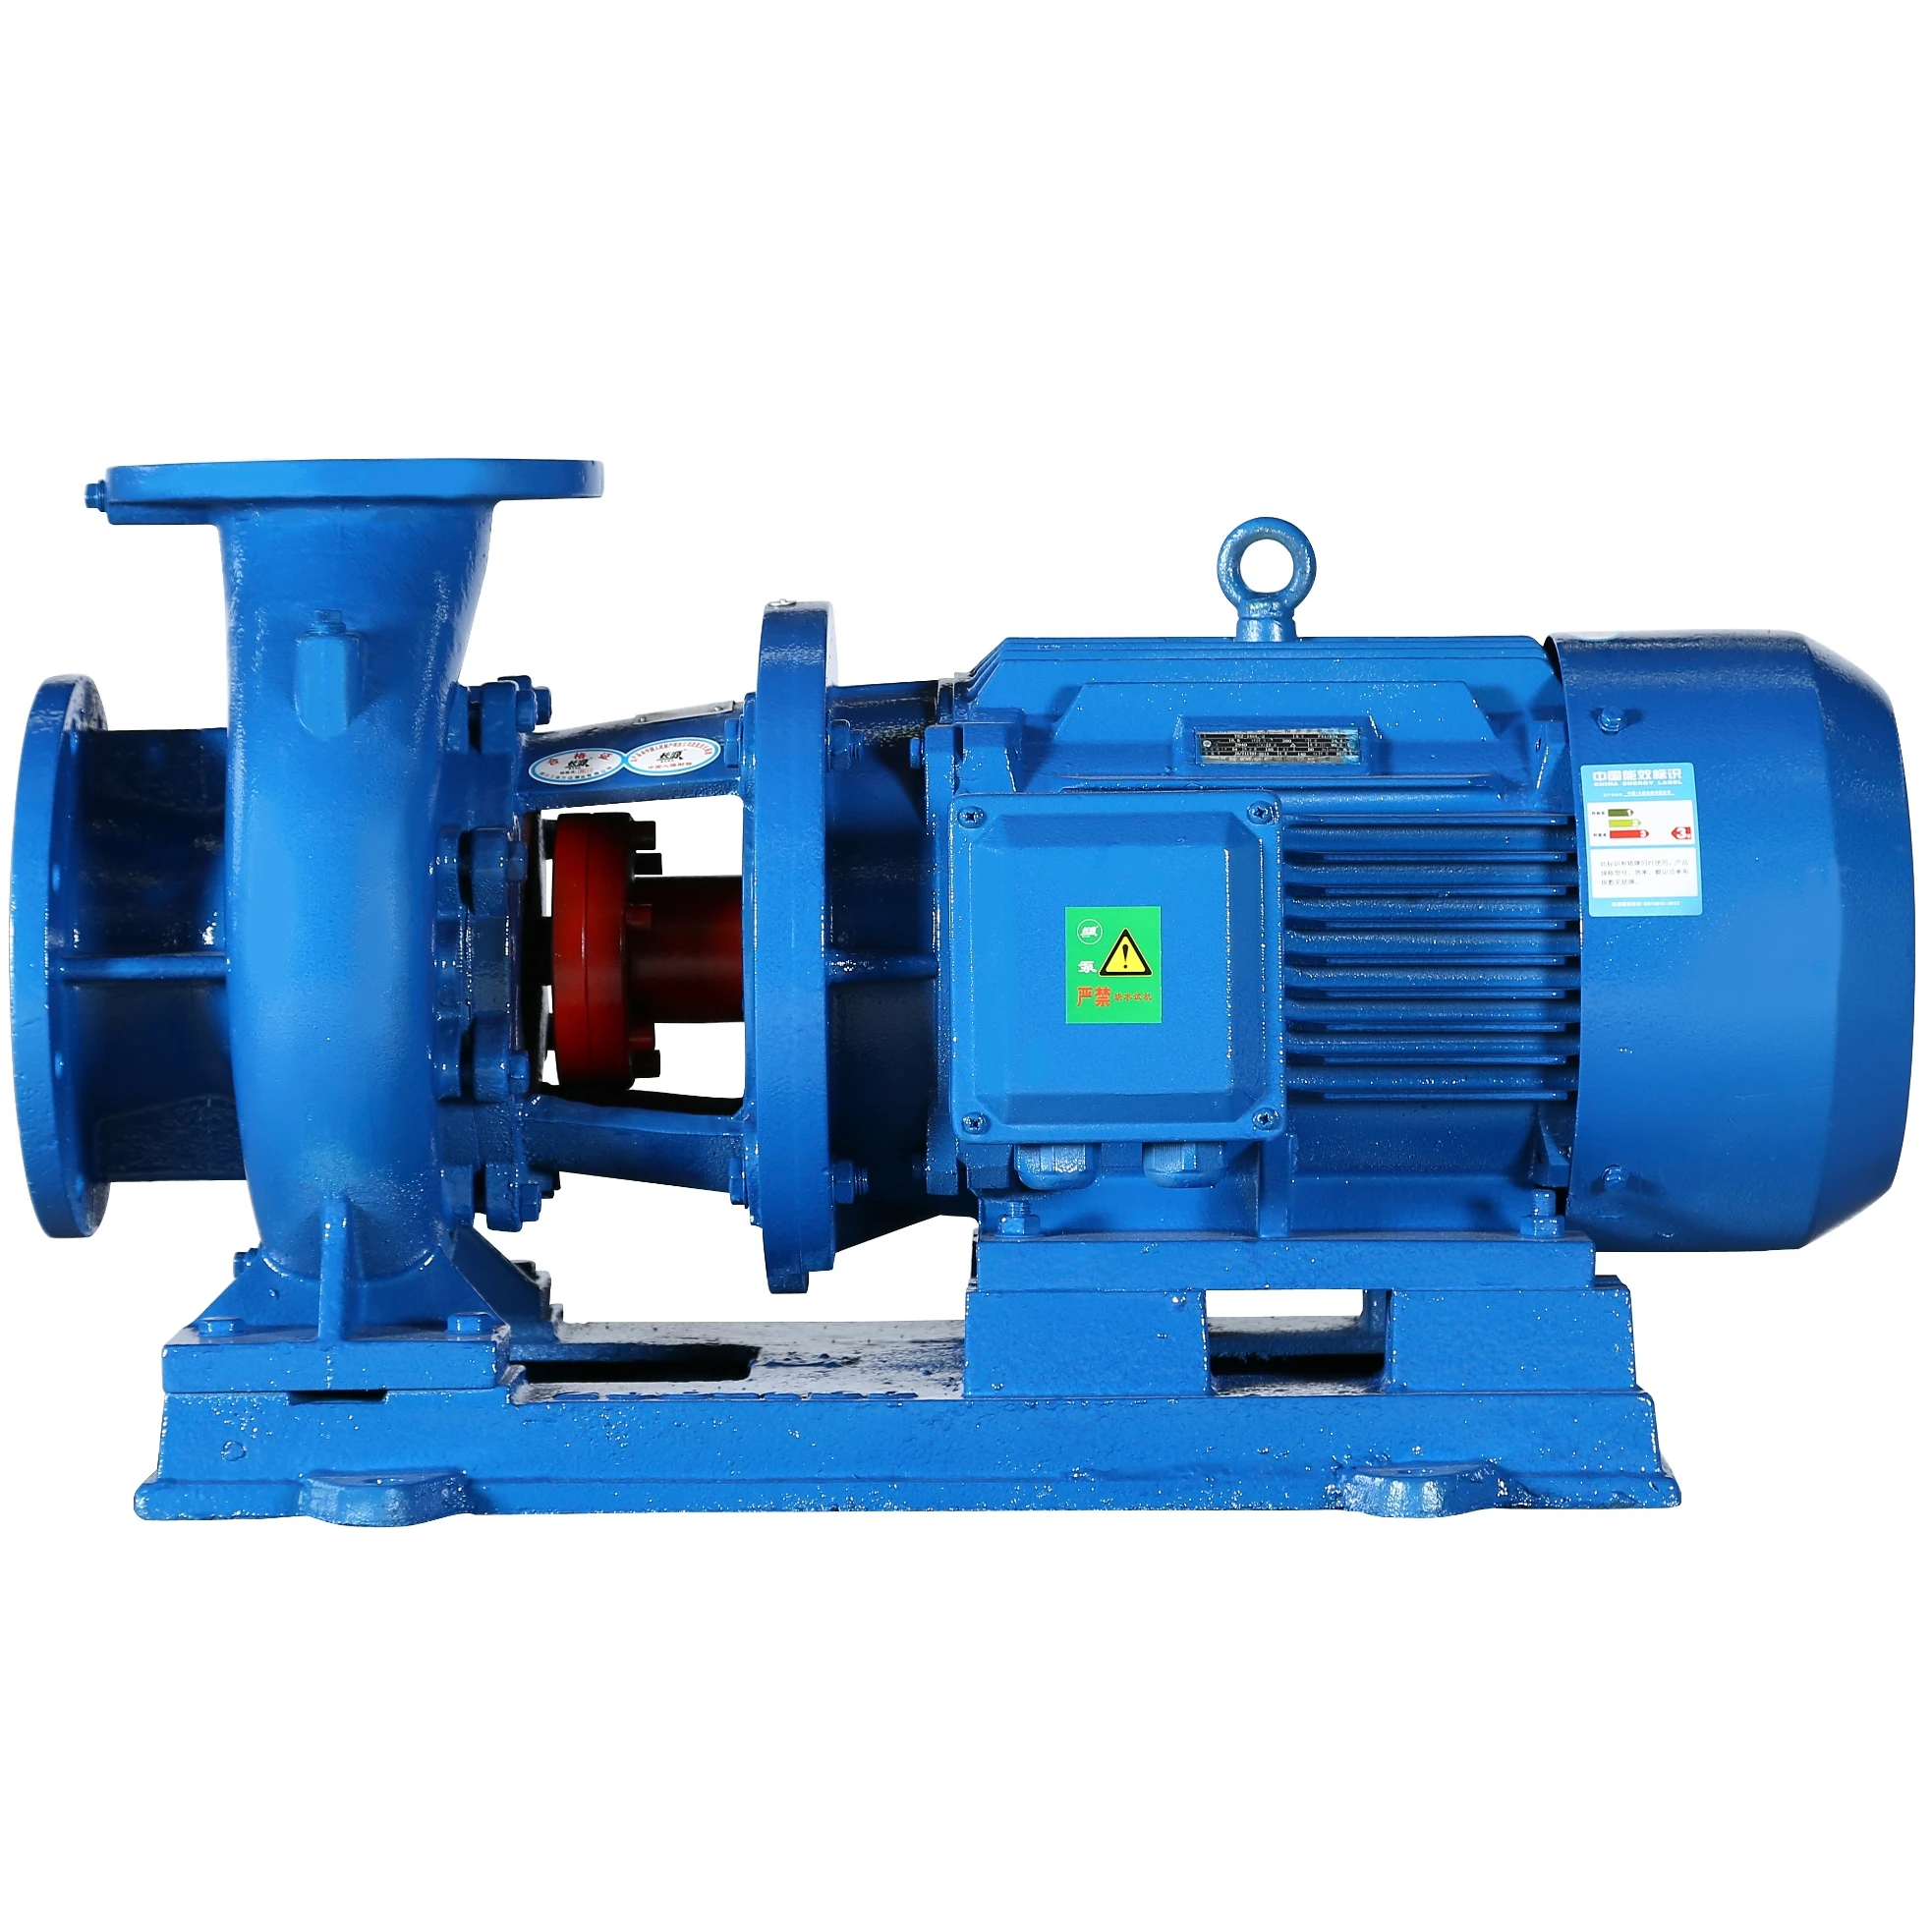 Hot selling interchangeable material long service life low energy consumption ldz.Ldzr series of horizontal centrifugal pumps